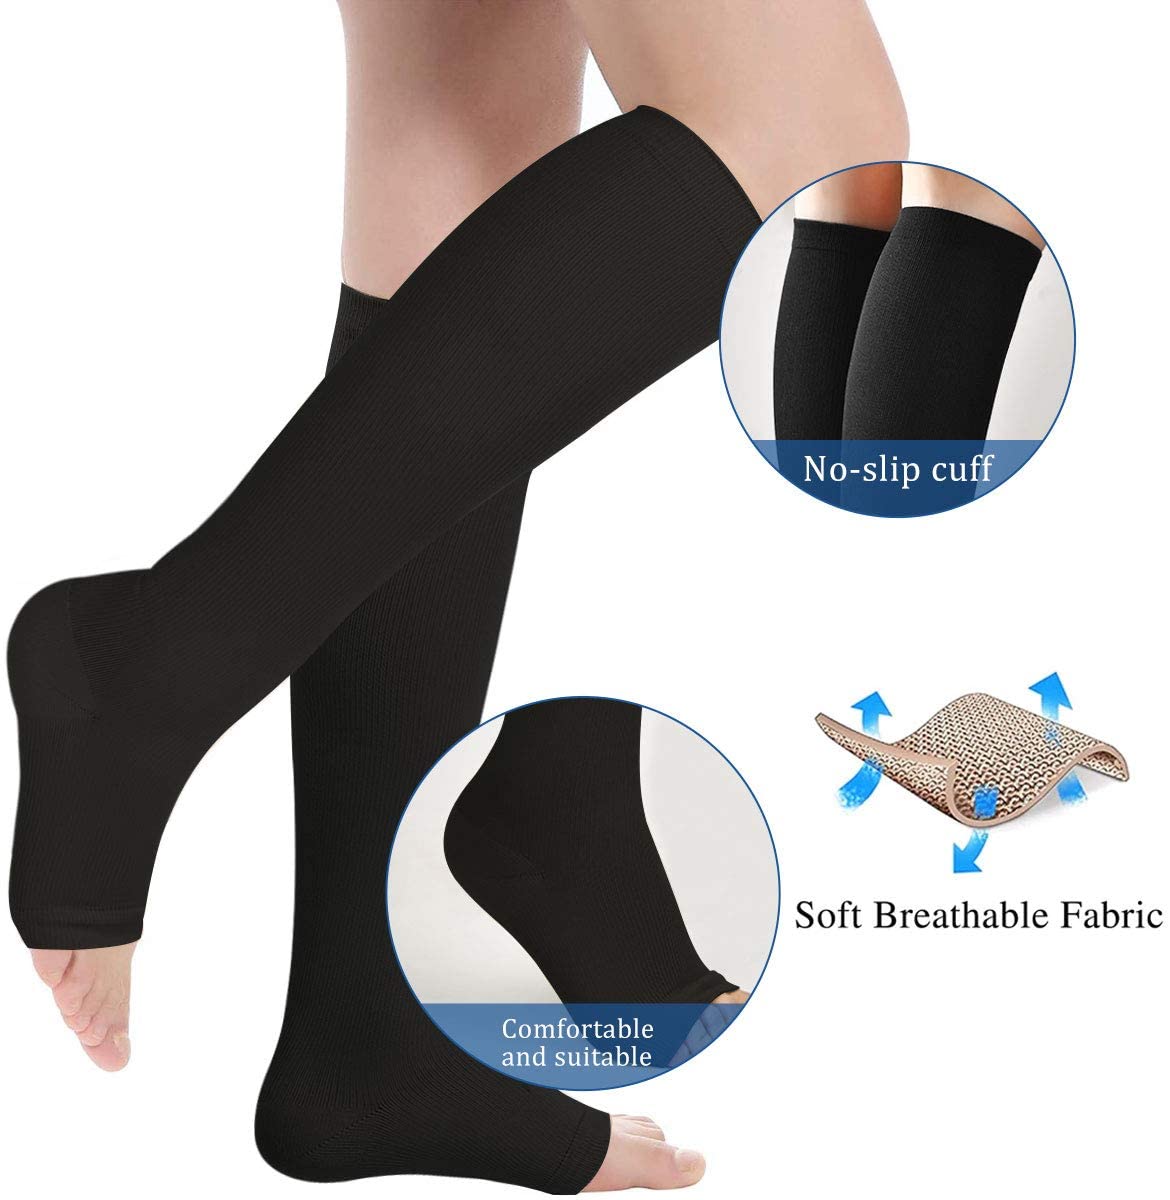 Compression Socks, Open Toe 20-30 mmHg Graduated Compression Stockings for Men Women, Knee High Compression Sleeves for DVT, Maternity, Pregnancy, Varicose Veins, Relief Shin Splints, Edema